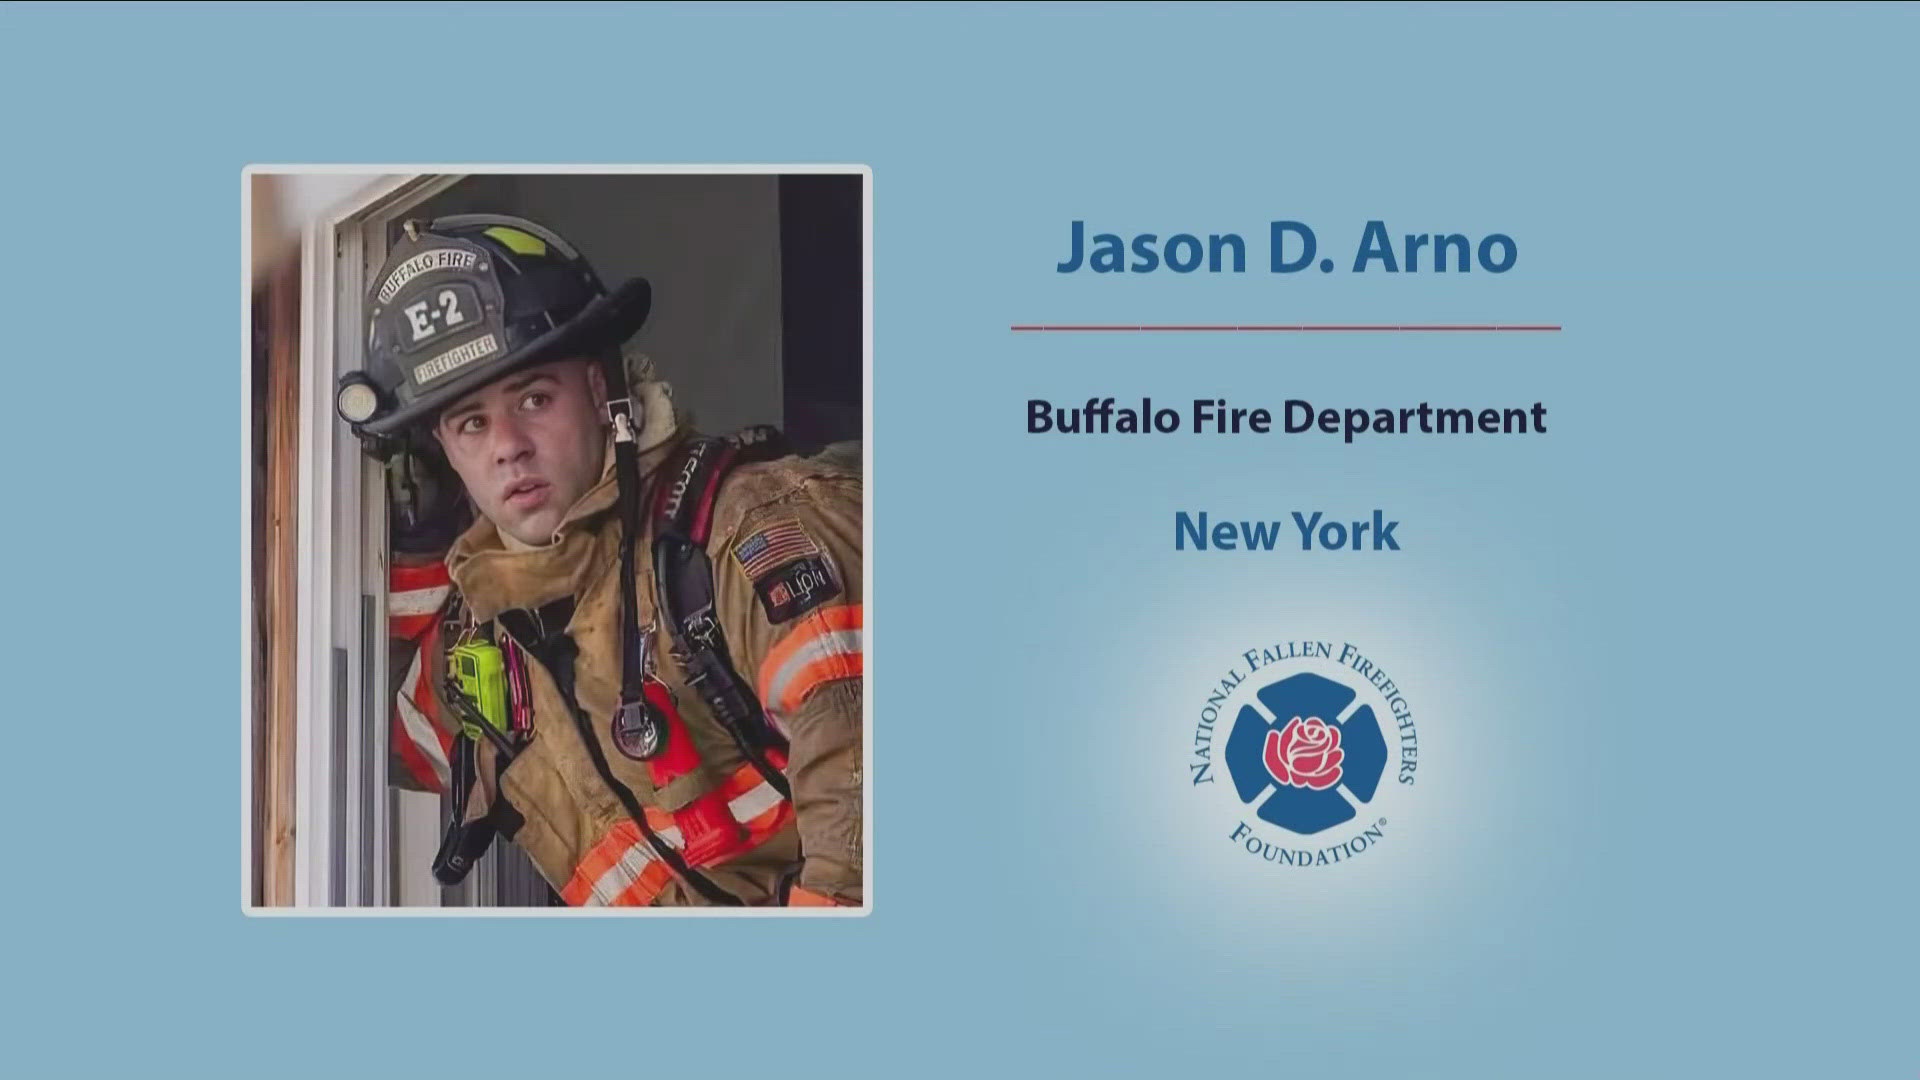 Jason Arno is among the 226 people who will be honored during the 43rd annual National Fallen Firefighters Memorial Weekend in Emmitsburg, Md.